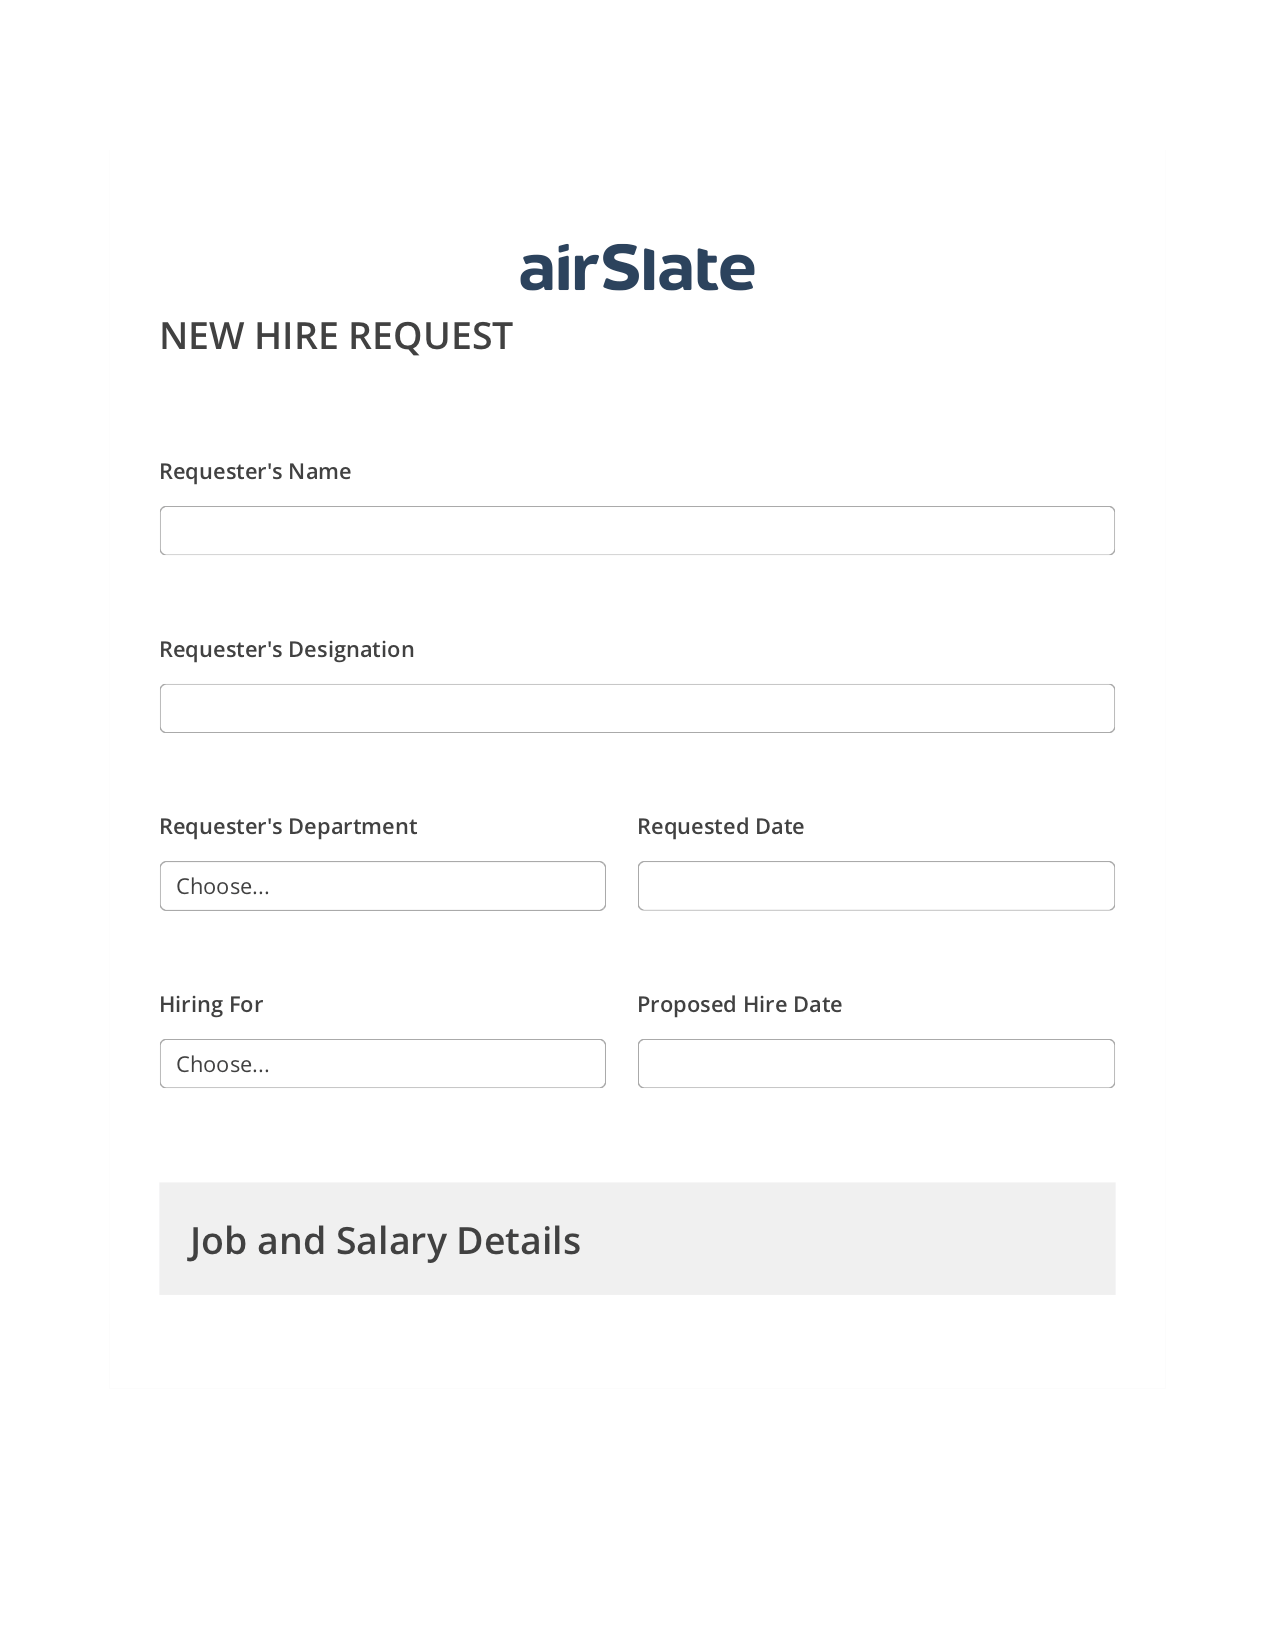 Multirole Hiring Request Workflow Pre-fill from Litmos bot, Send a Slate with Roles Bot, Export to Smartsheet